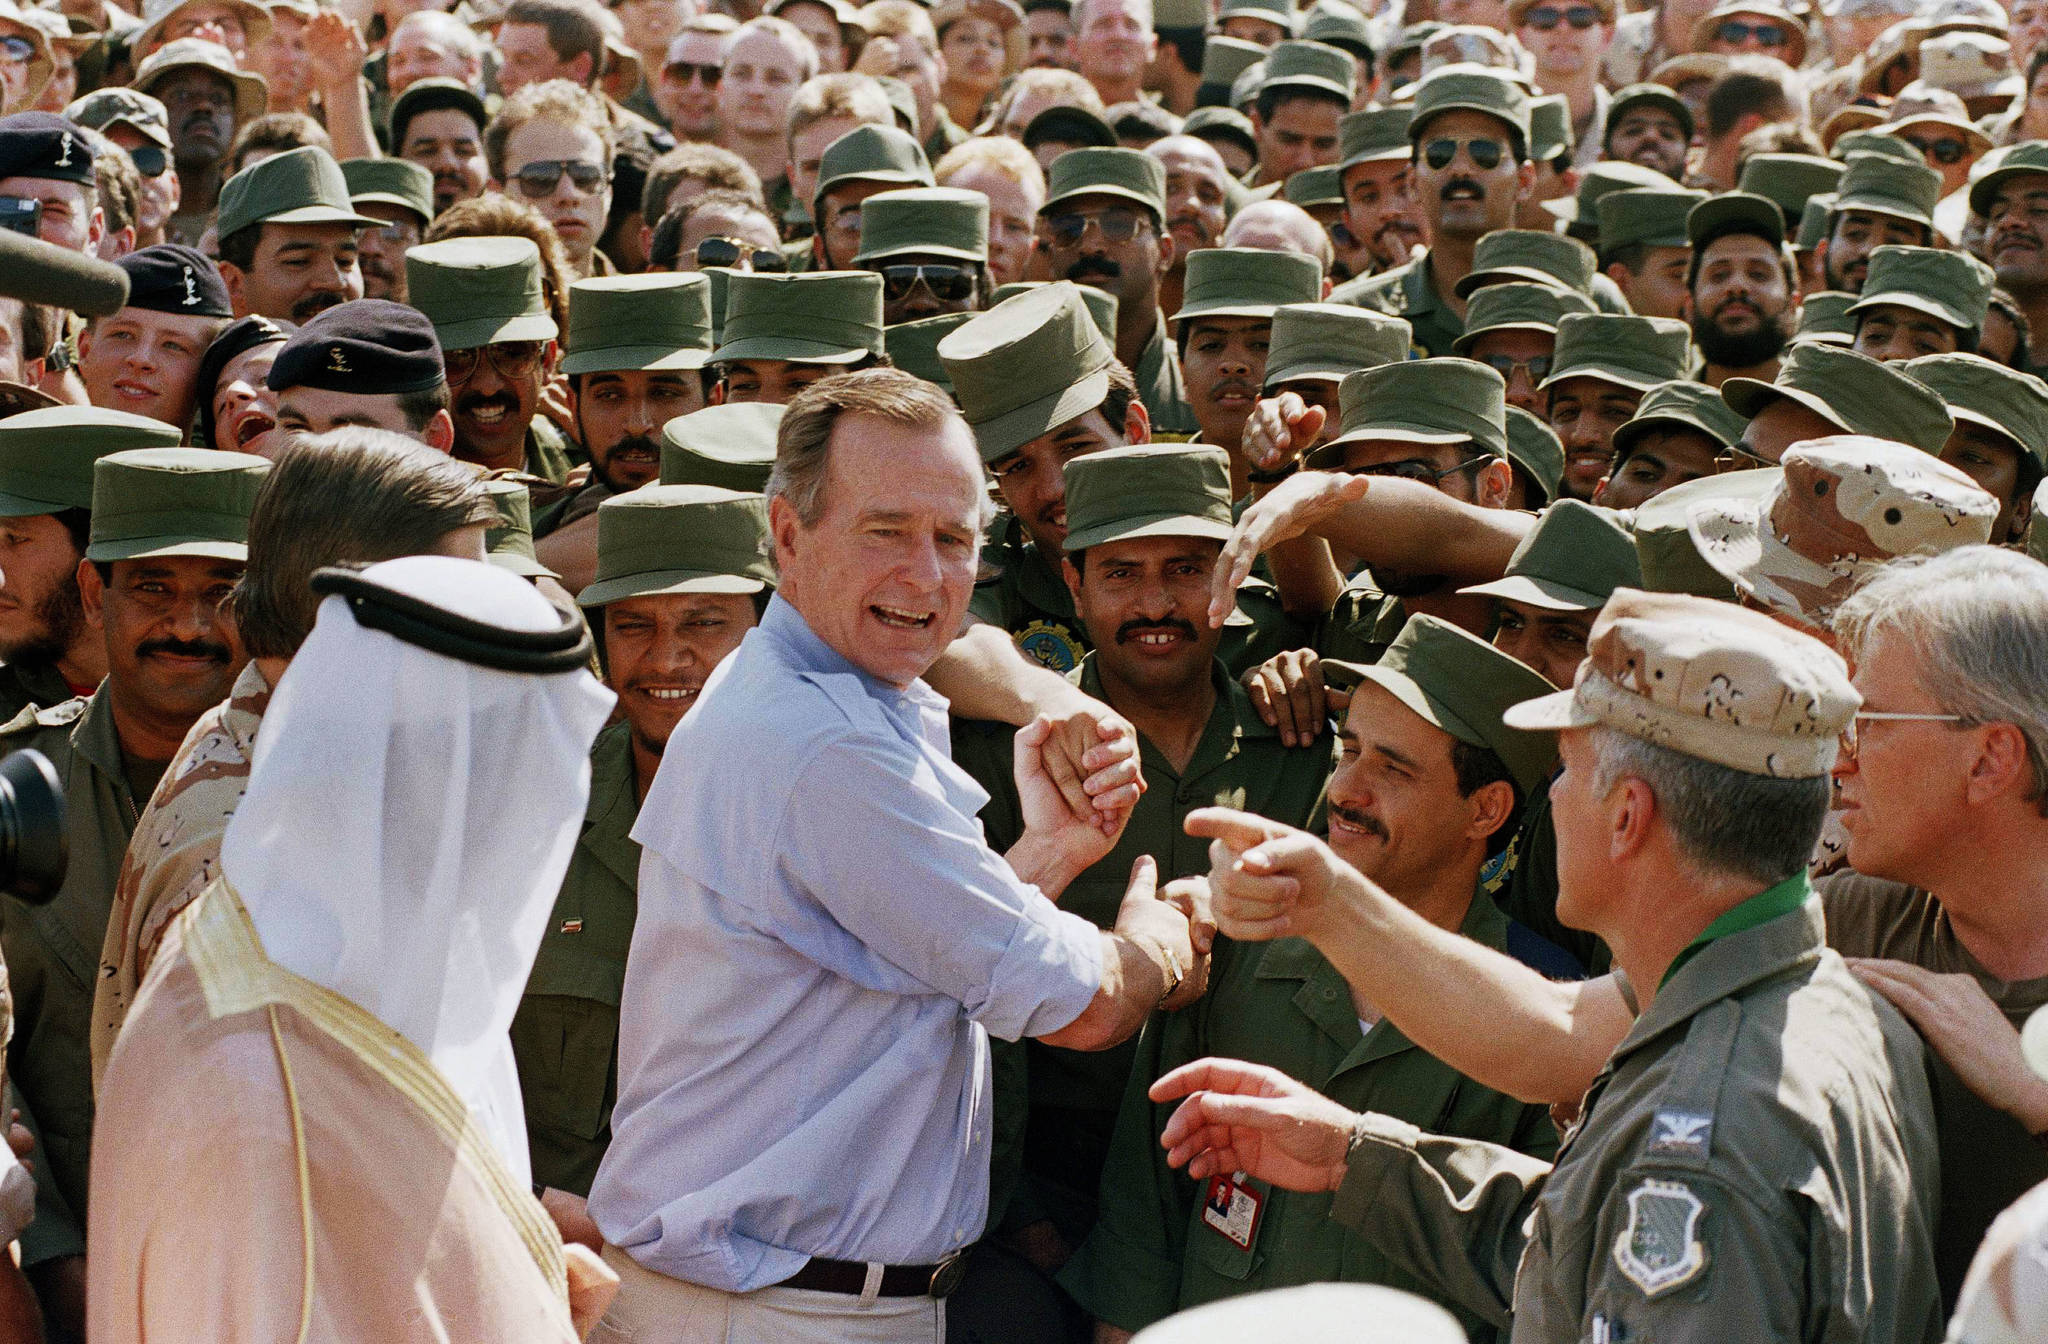 In this Nov. 22, 1990 file photo, President George H.W. Bush is greeted by Saudi troops and others as he arrives in Dhahran, Saudi Arabia, for a Thanksgiving visit. Bush died at the age of 94 on Friday, about eight months after the death of his wife, Barbara Bush. (AP Photo/J. Scott Applewhite, File)